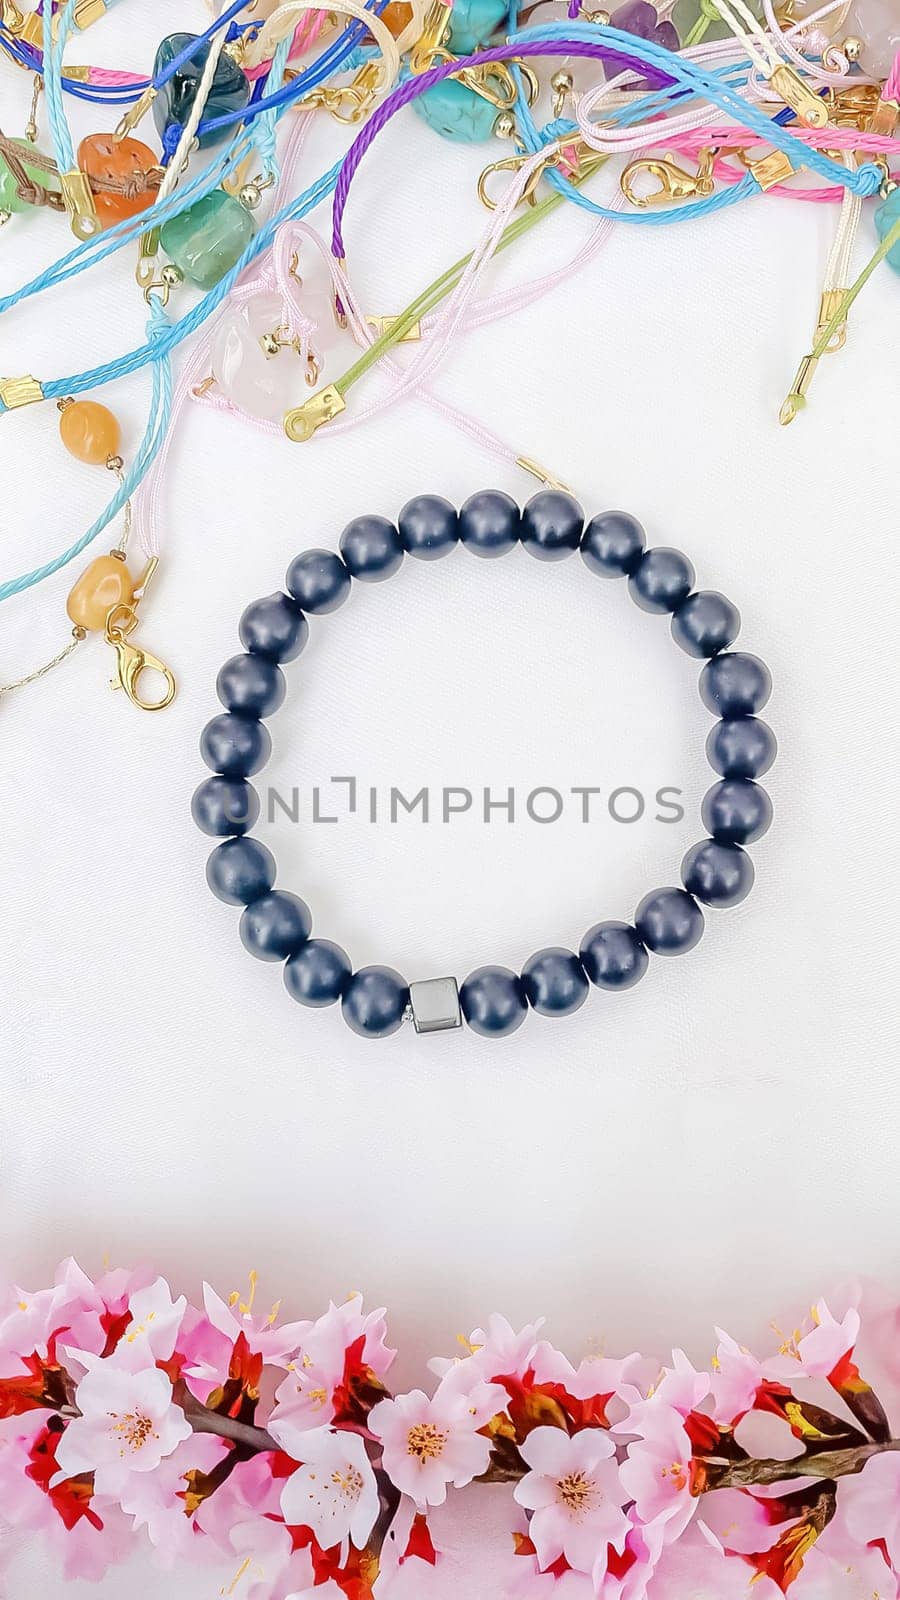 Bracelet of gray stone beads and cherry blossoms on a white background with space for text.